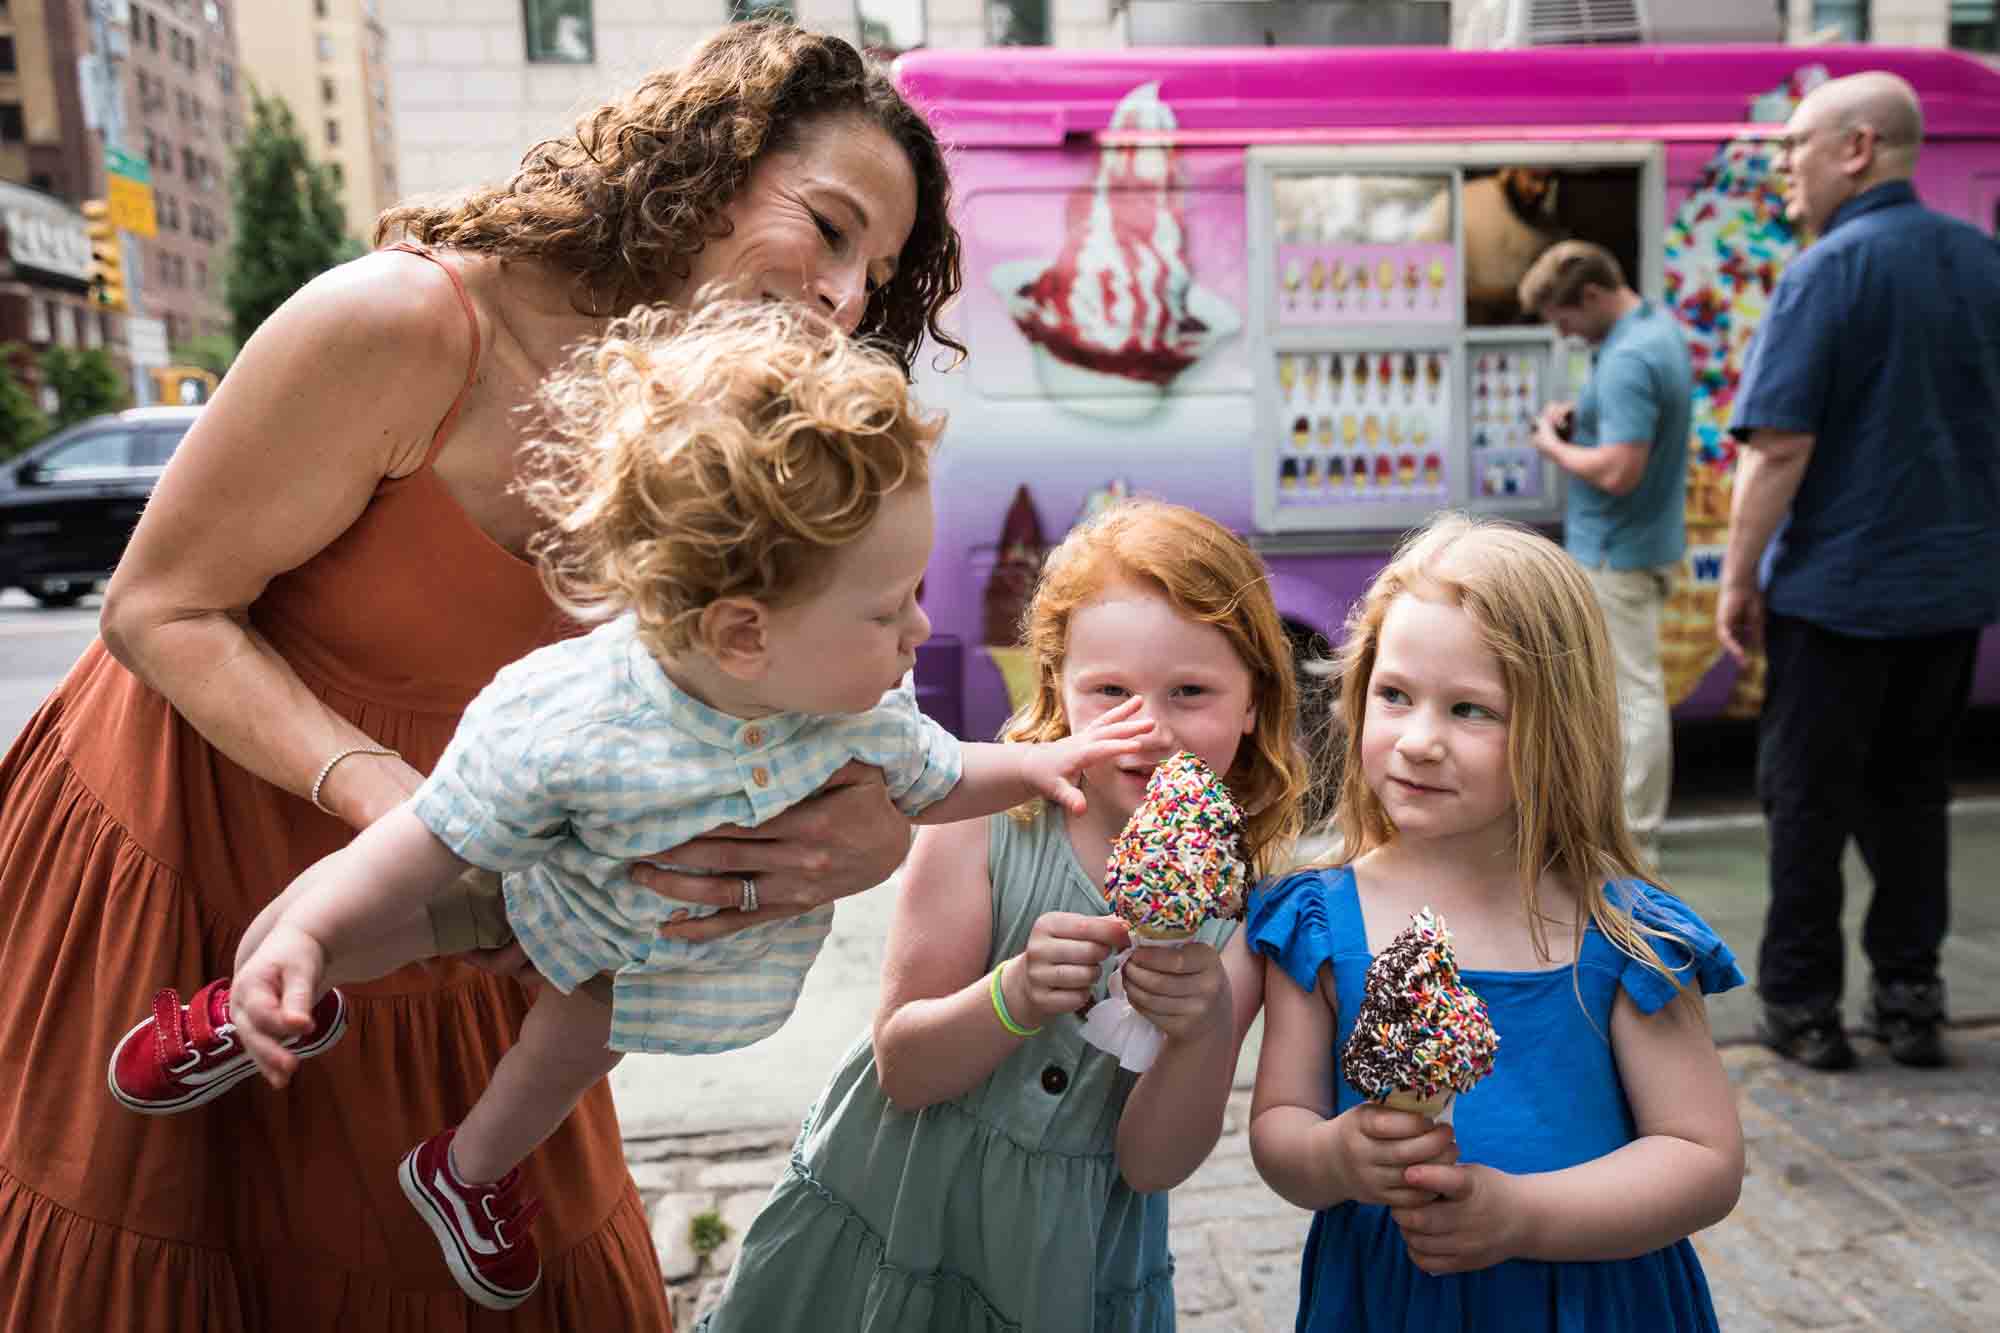 Mother holding baby boy reaching out for colorful ice cream cone held by two little girls on sidewalk